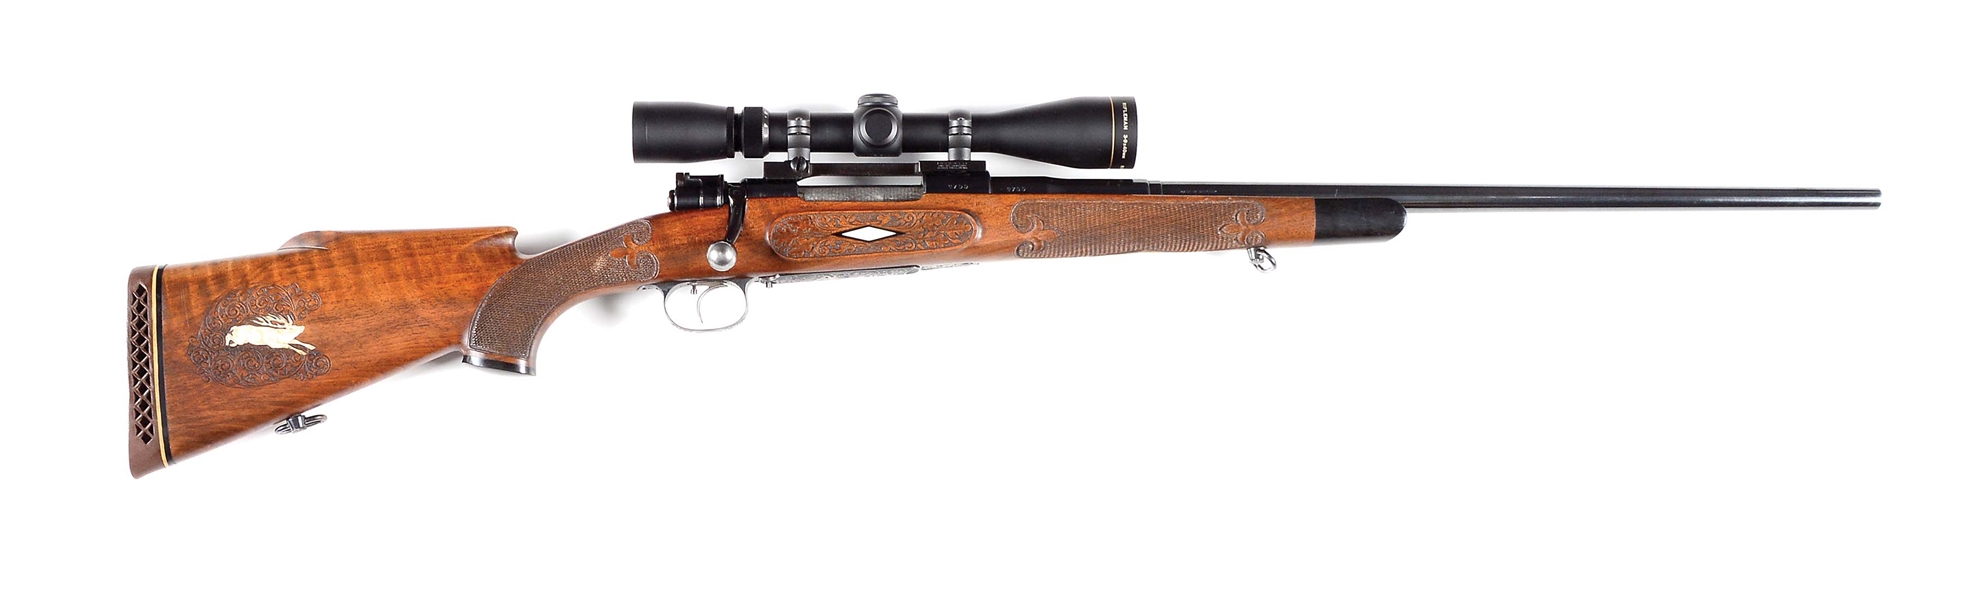 (C) FN MAUSER SPORTER WITH CARVED AND INLAID STOCK AND SCOPE